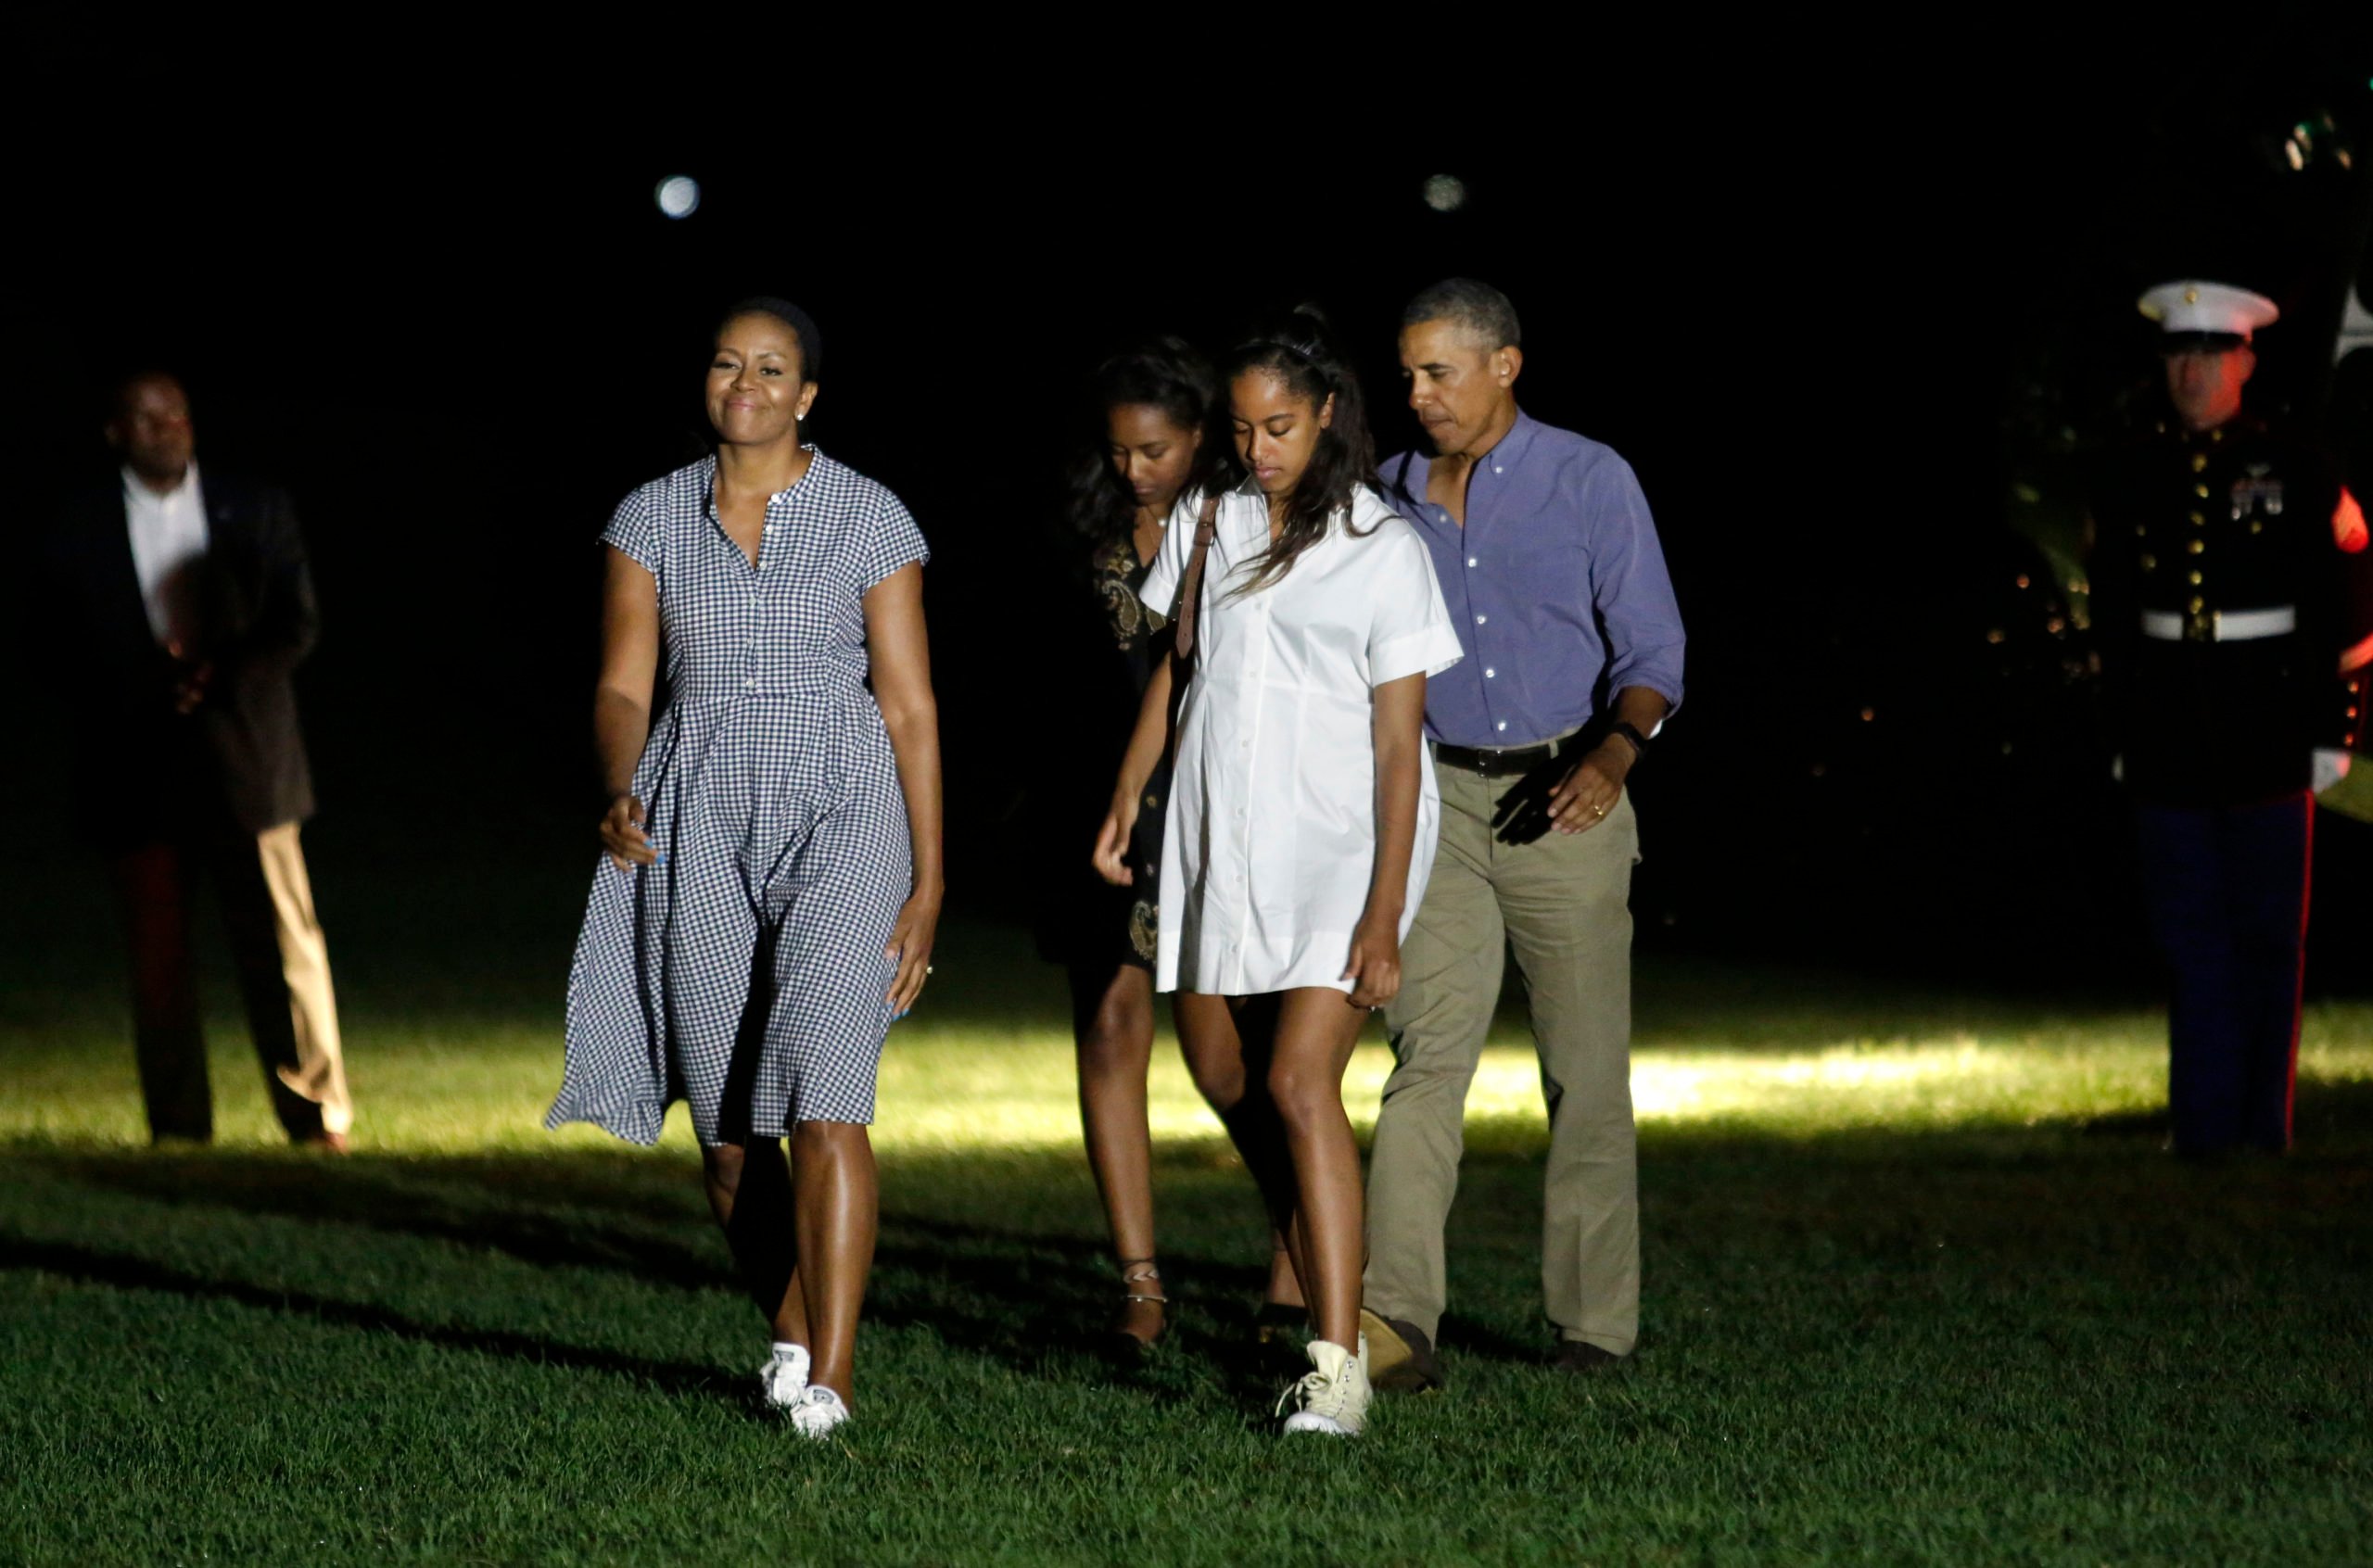 US President Barack Obama waves as he walks with First lady Michelle Obama (L) and their daughters Malia (2nd-R) and Sasha (3rd-R) on the South Lawn of the White House in Washington upon their return from a summer vacation in Martha's Vineyard, Massachusetts on August 21, 2016. / AFP / YURI GRIPAS (Photo credit should read YURI GRIPAS/AFP via Getty Images)